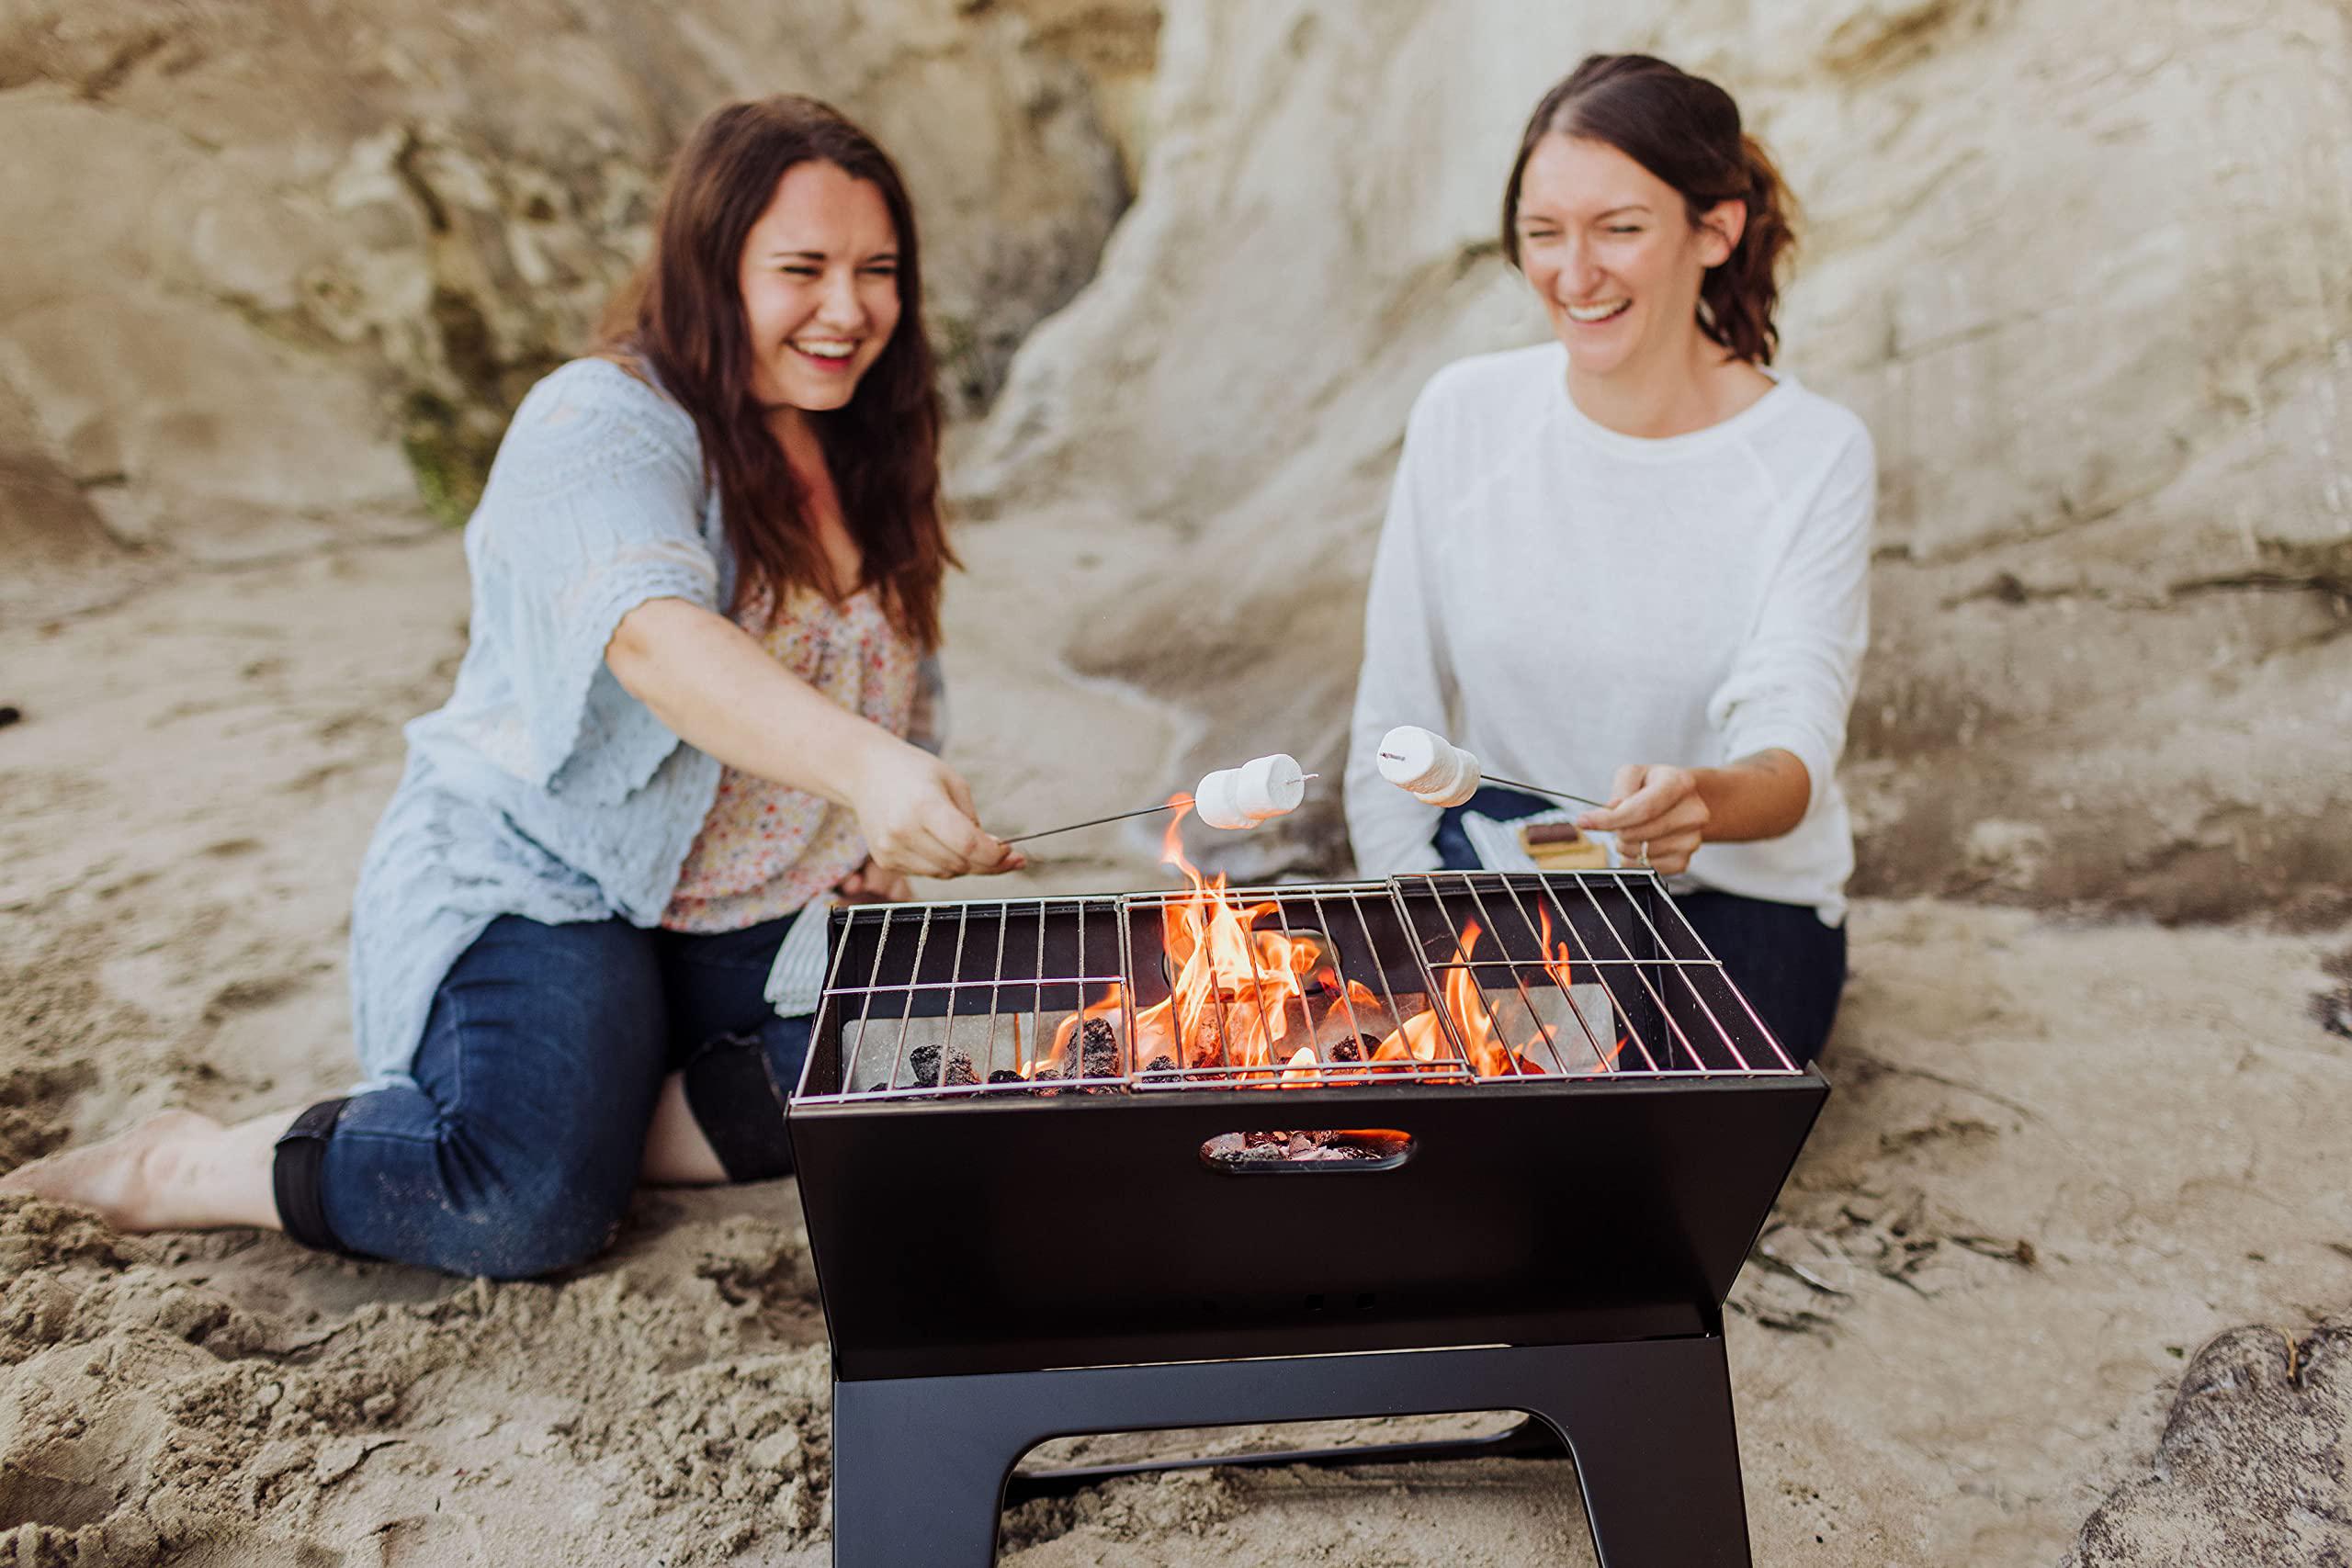 Picnic Time oniva - a picnic time brand x-grill portable grill, camping grill, small charcoal grill for tailgating, (black)